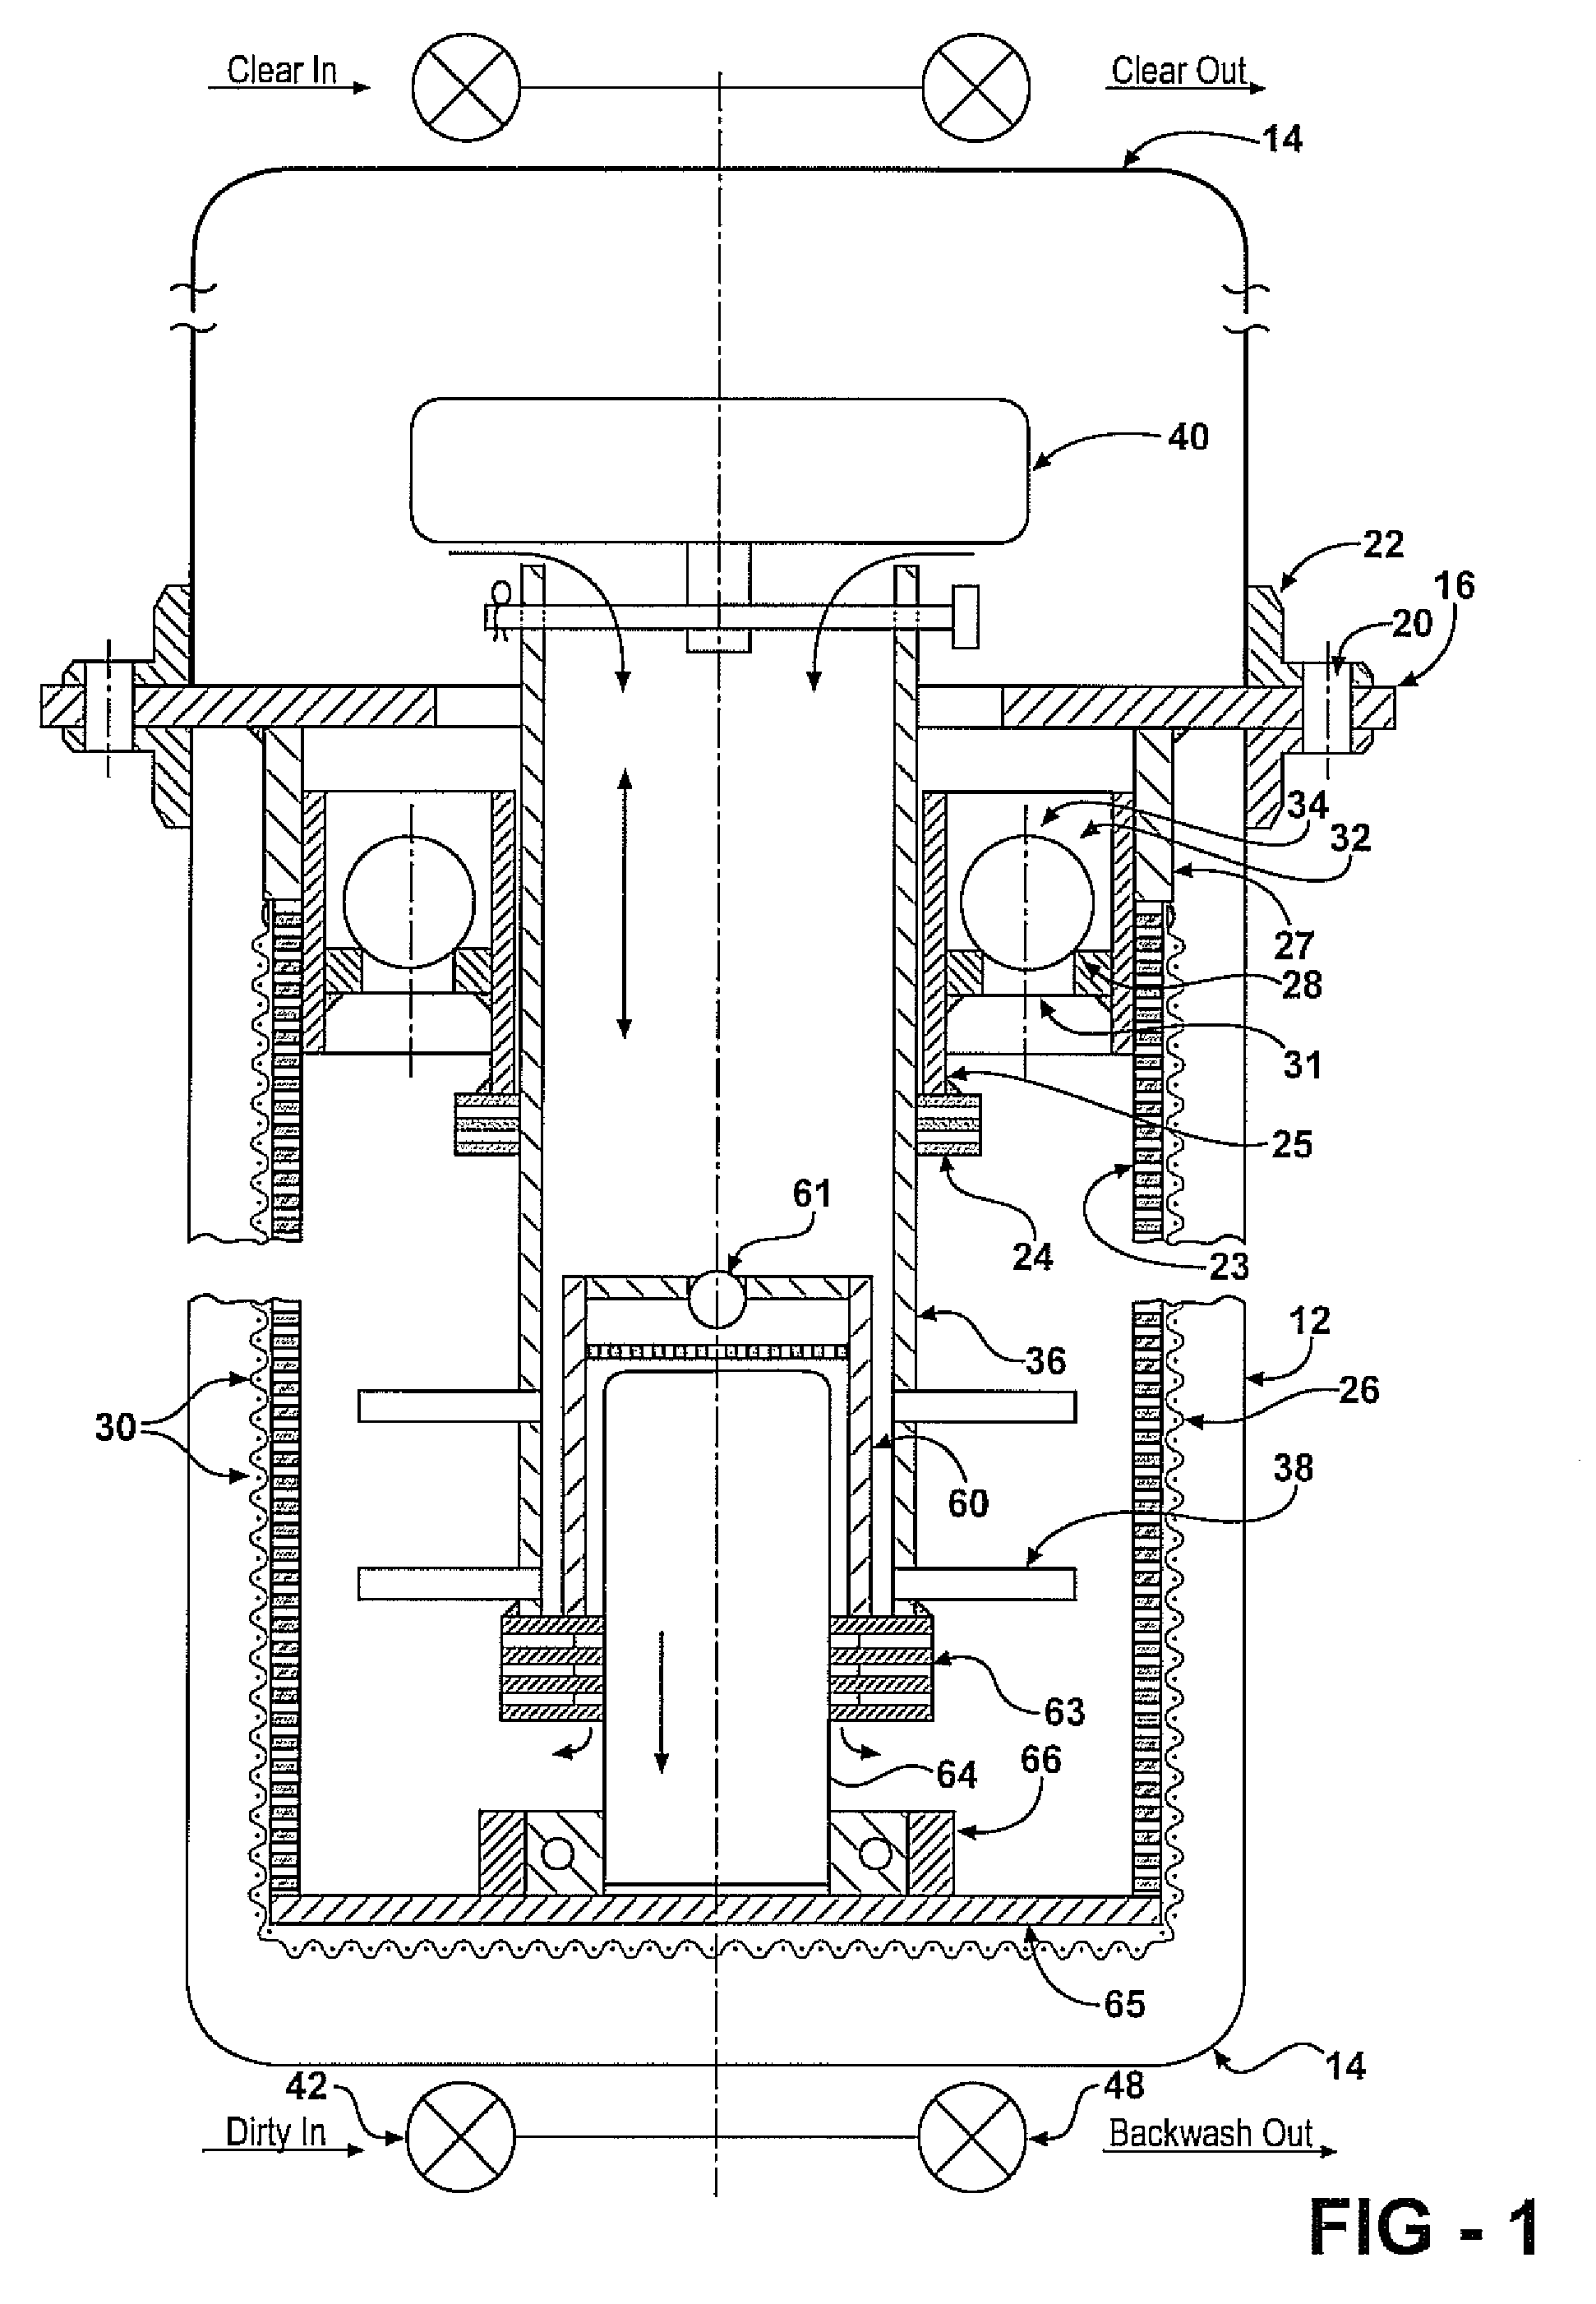 Apparatus for cleaning stationary, permanent vertical cylindrical cartridges incorporating a float affixed to a central and linearly traversable backwash tube incorporating spray nozzles to induce rotation